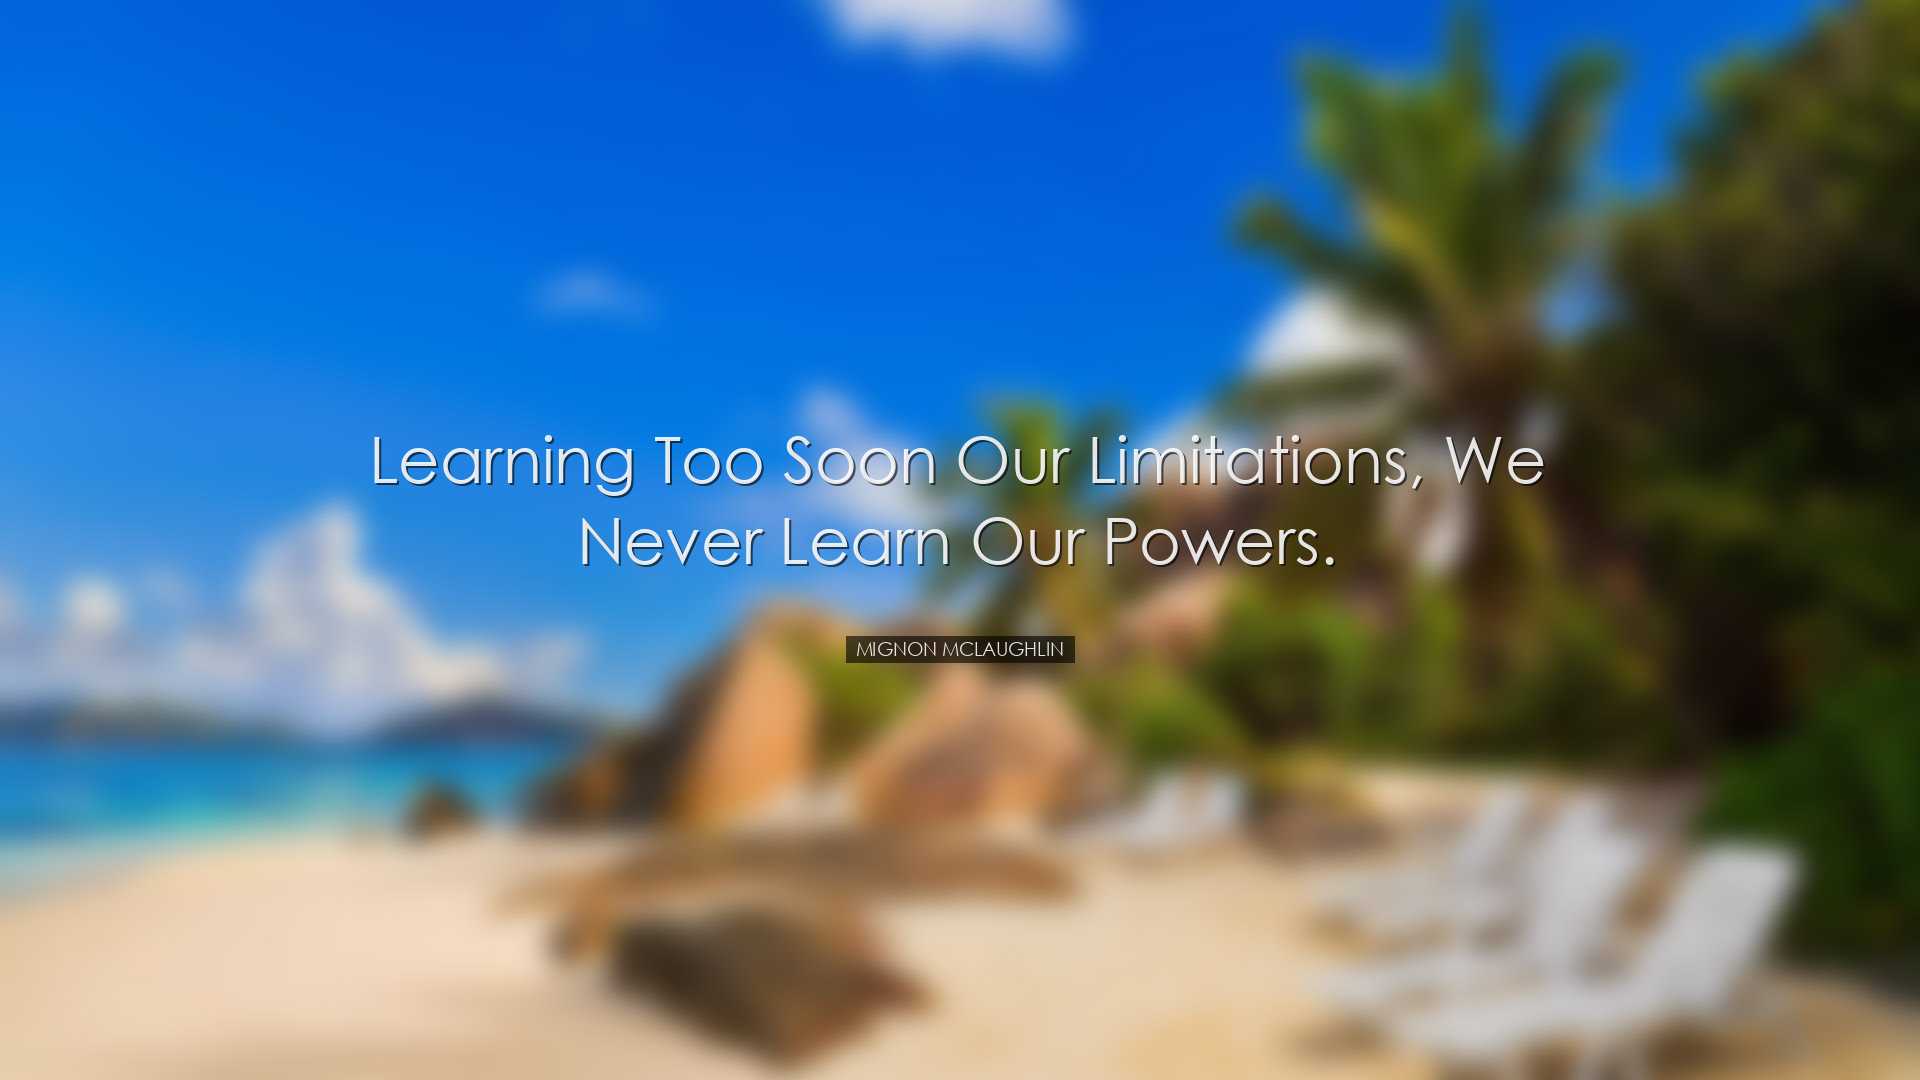 Learning too soon our limitations, we never learn our powers. - Mi